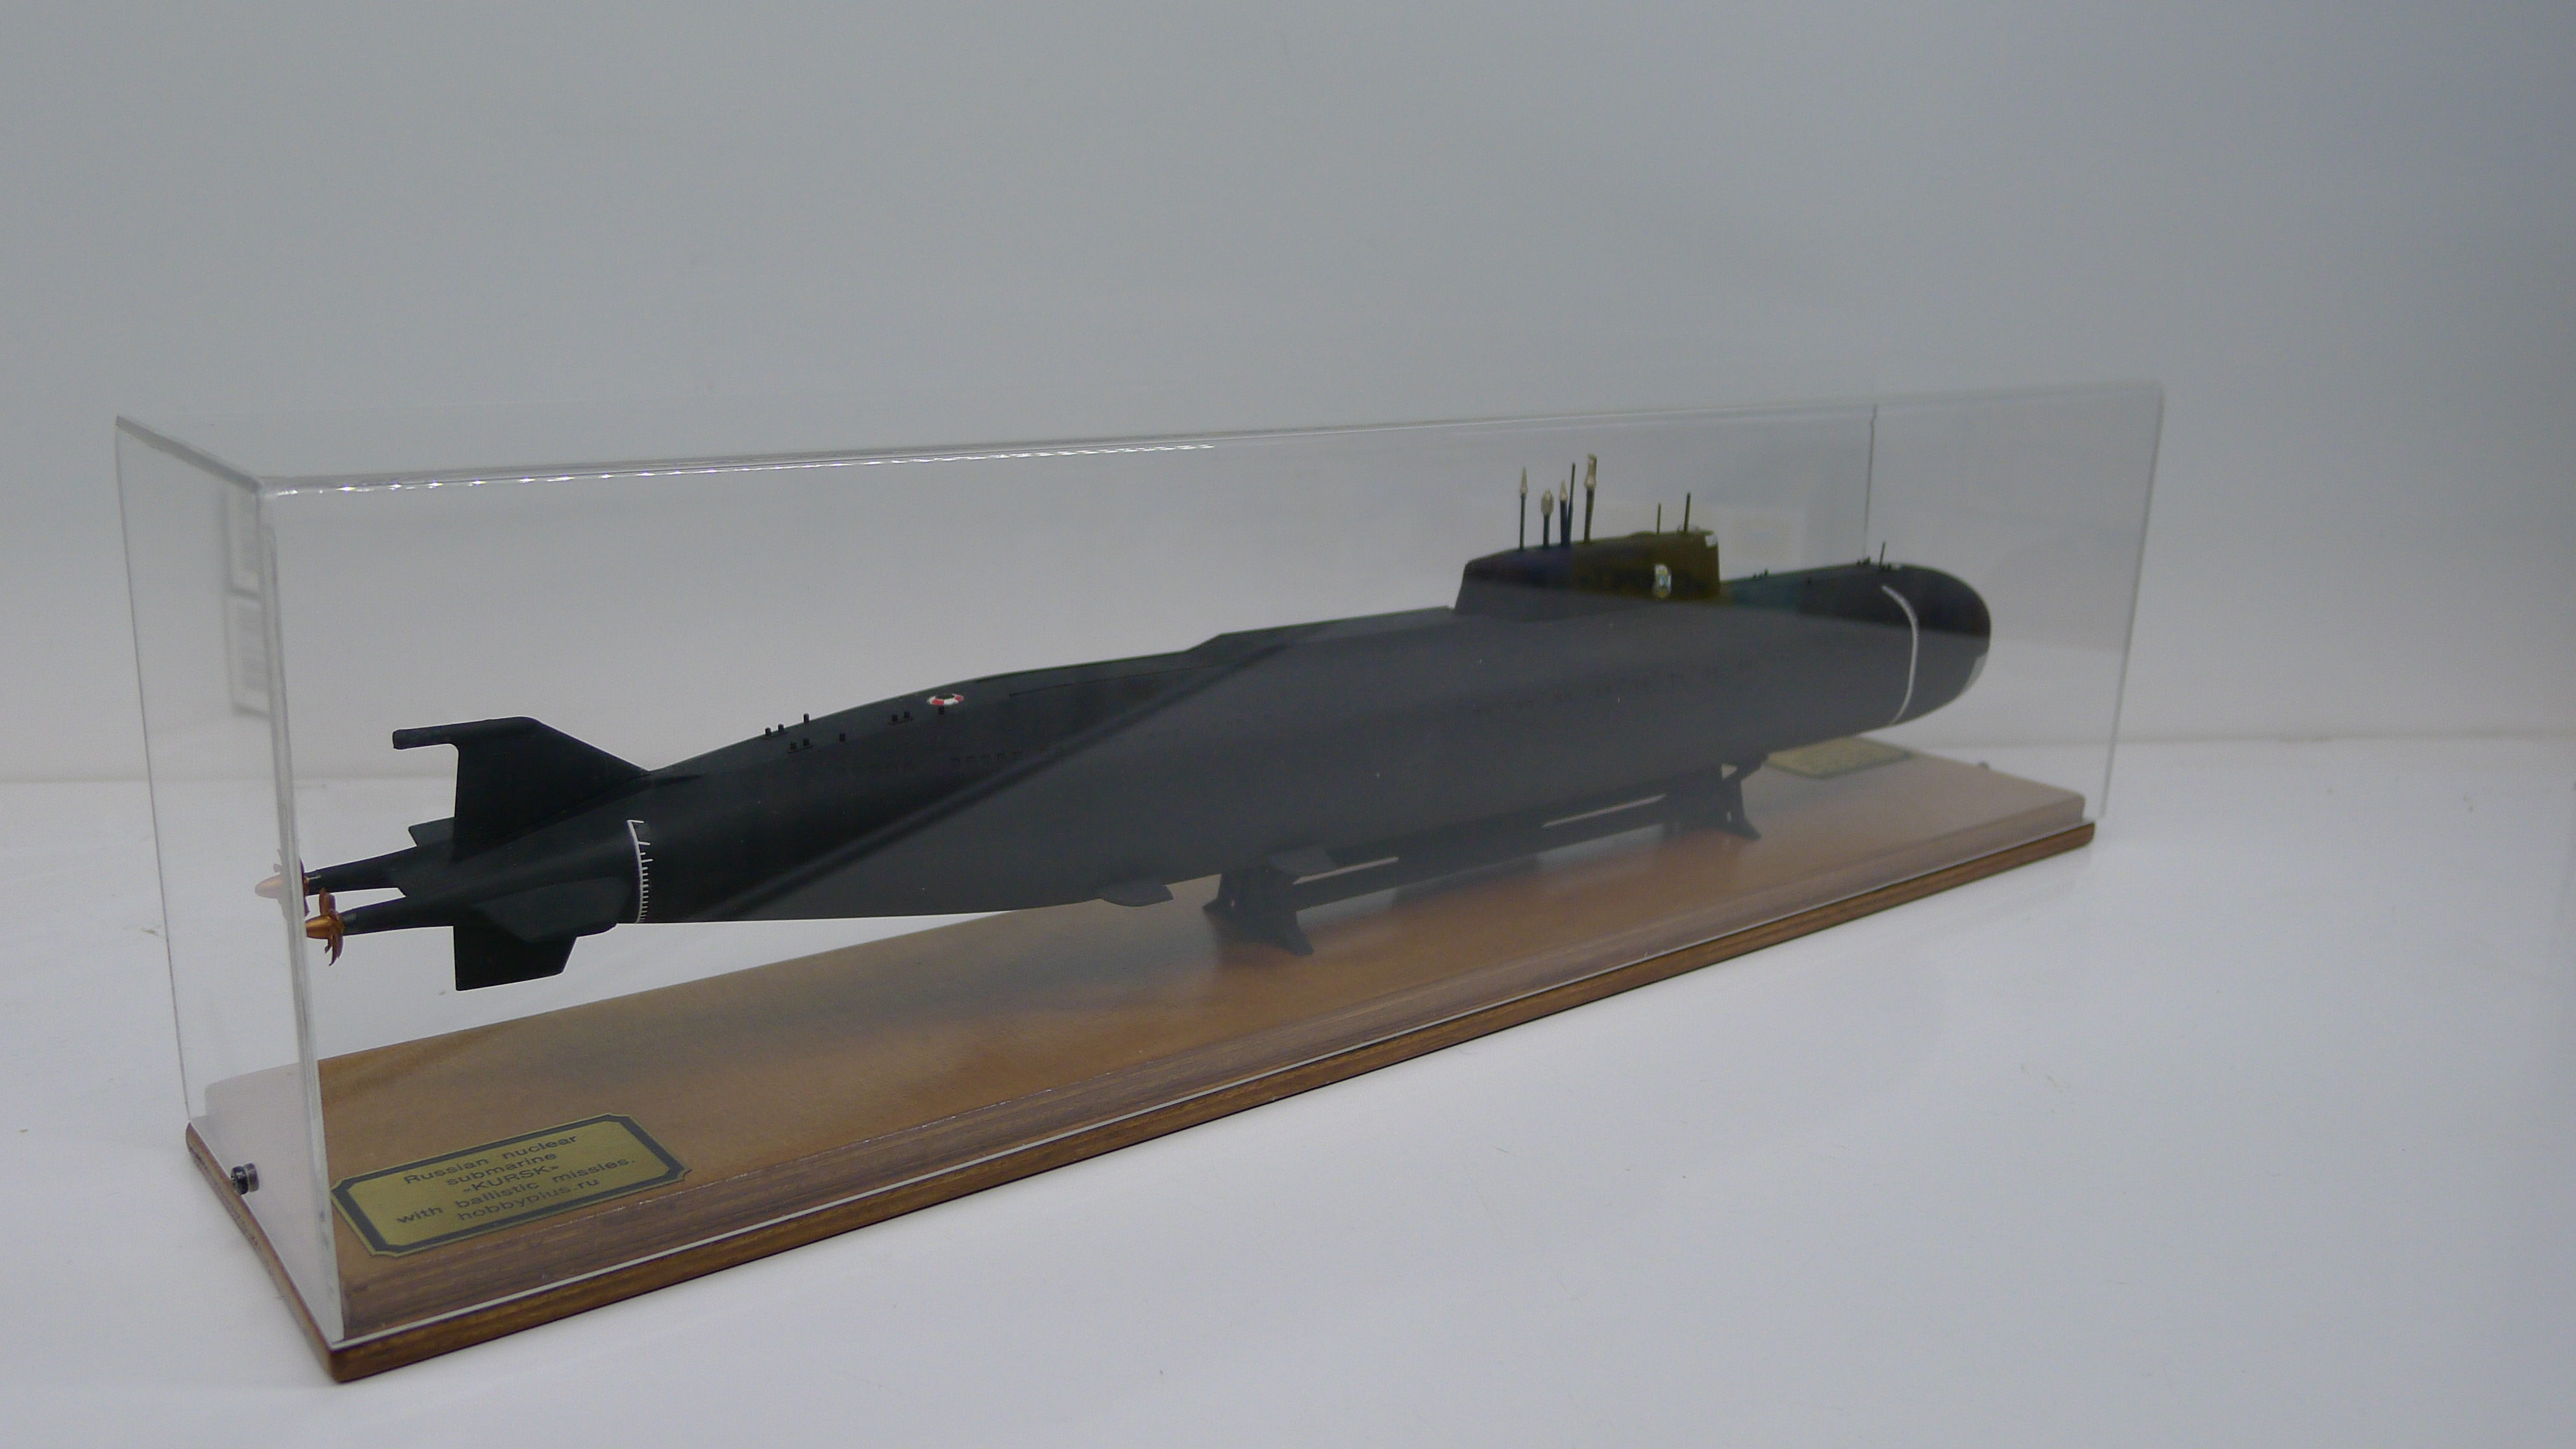       -141 .     .   45 ,   47 . Model of the Russian nuclear submarine missile boat K-141 